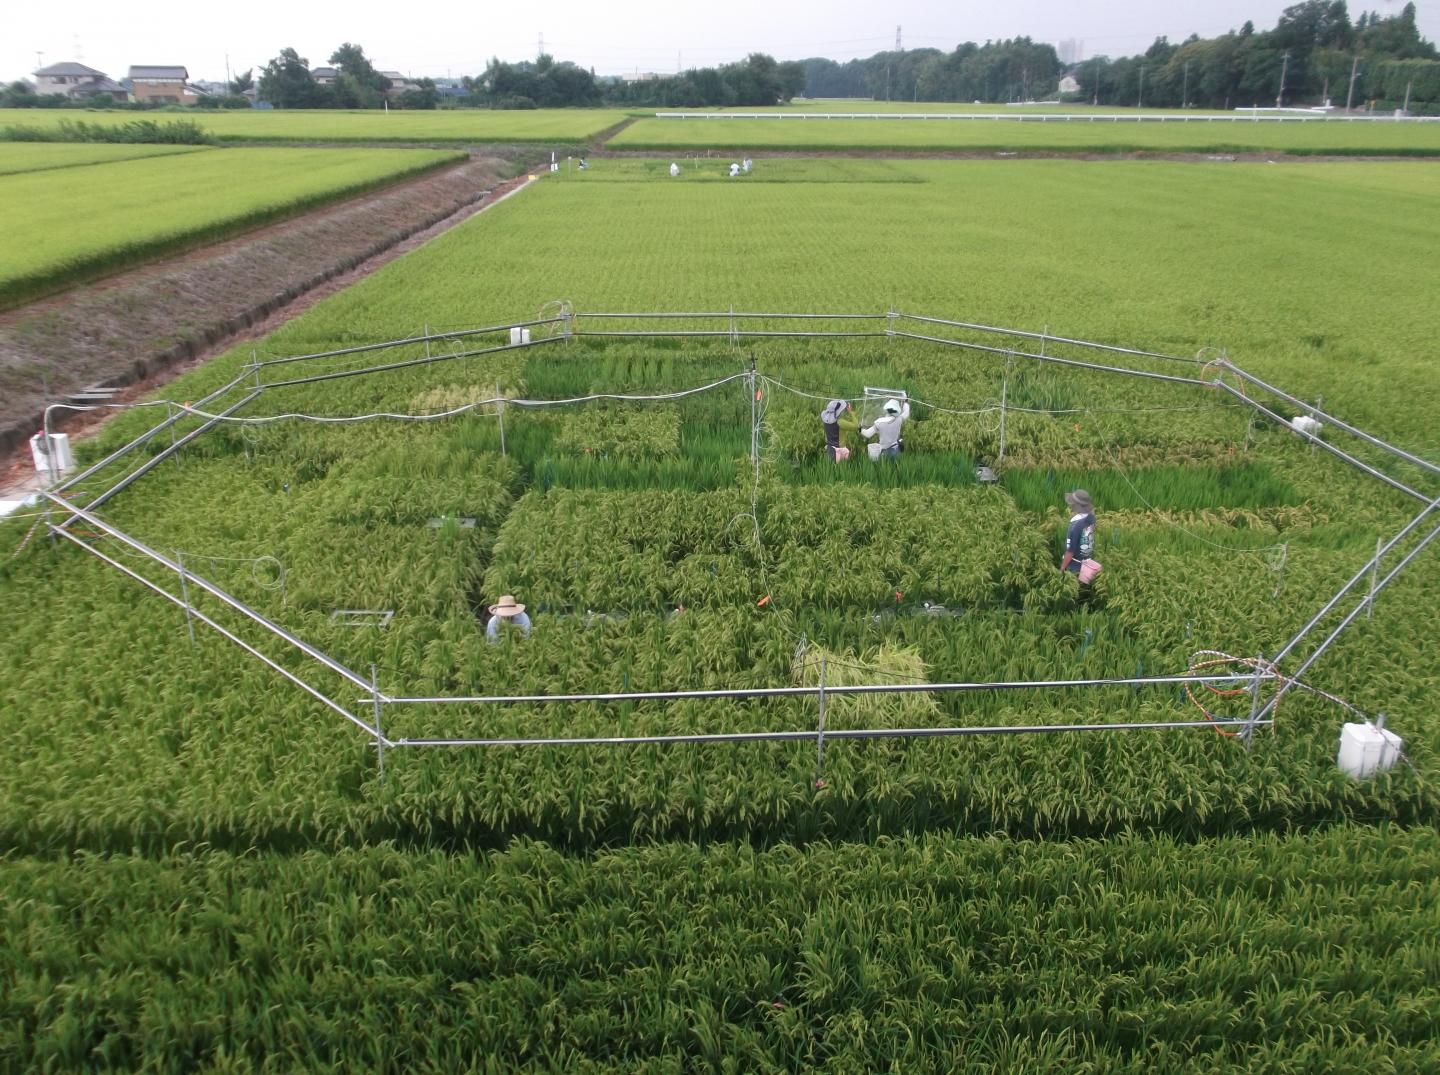 An experimental rice field near Tsukuba, Japan, testing the effects of increased carbon dioxide exposure. Toshihiro Hasegawa/National Agriculture and Food Research Organization of Japan